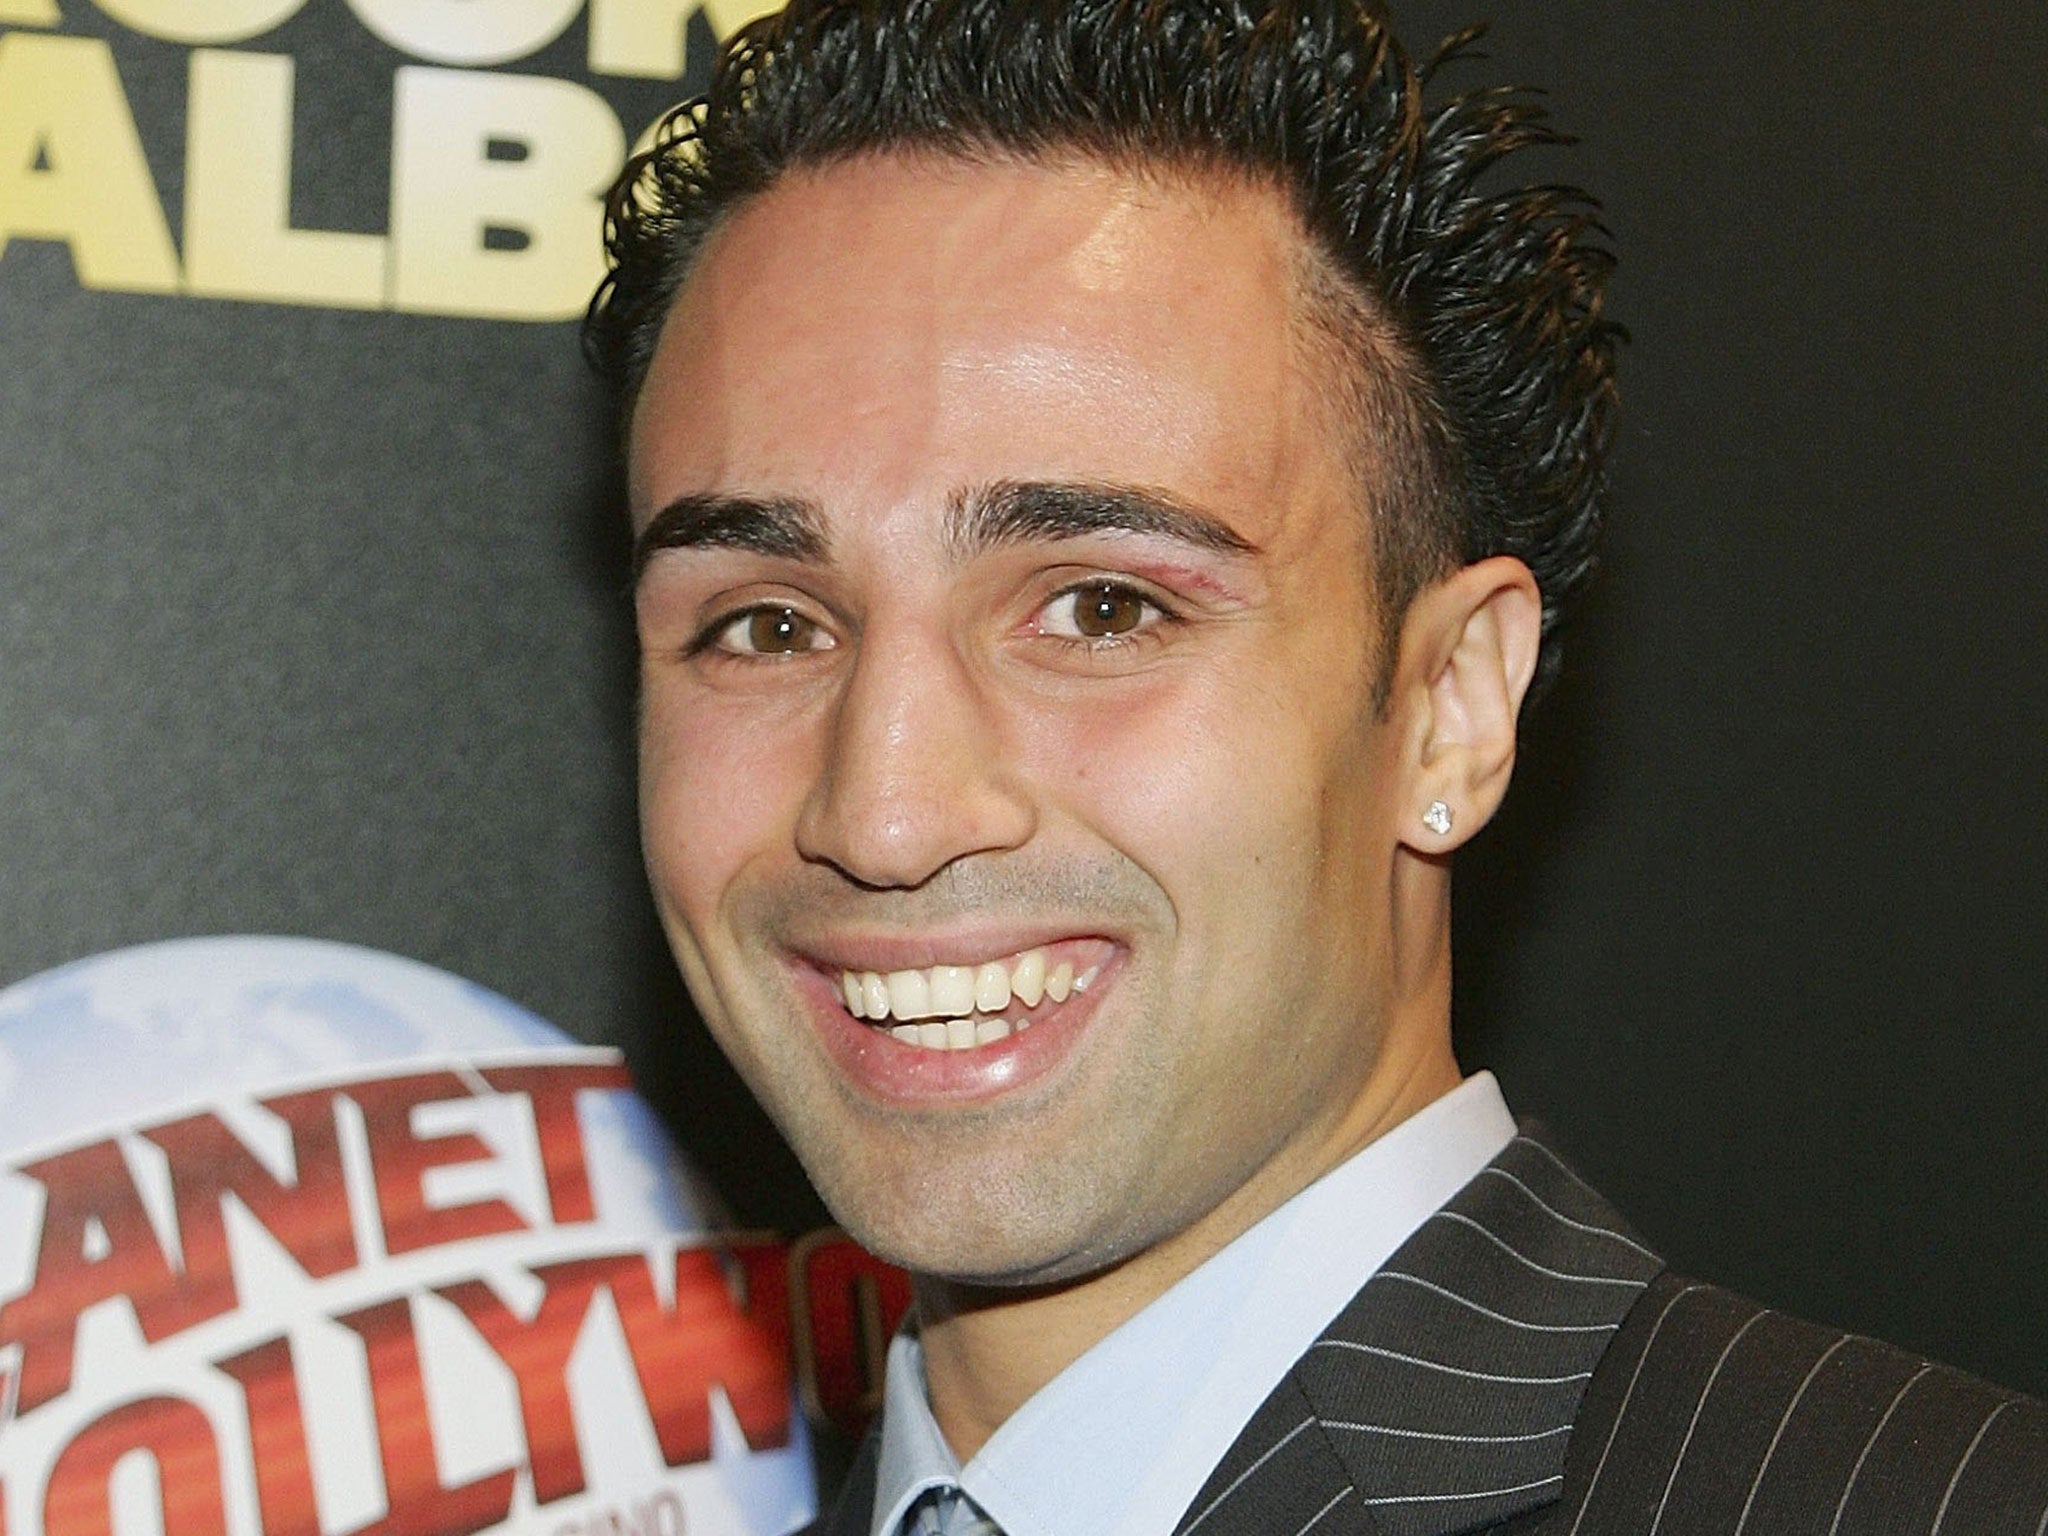 Paulie Malignaggi has offered his view on the fight